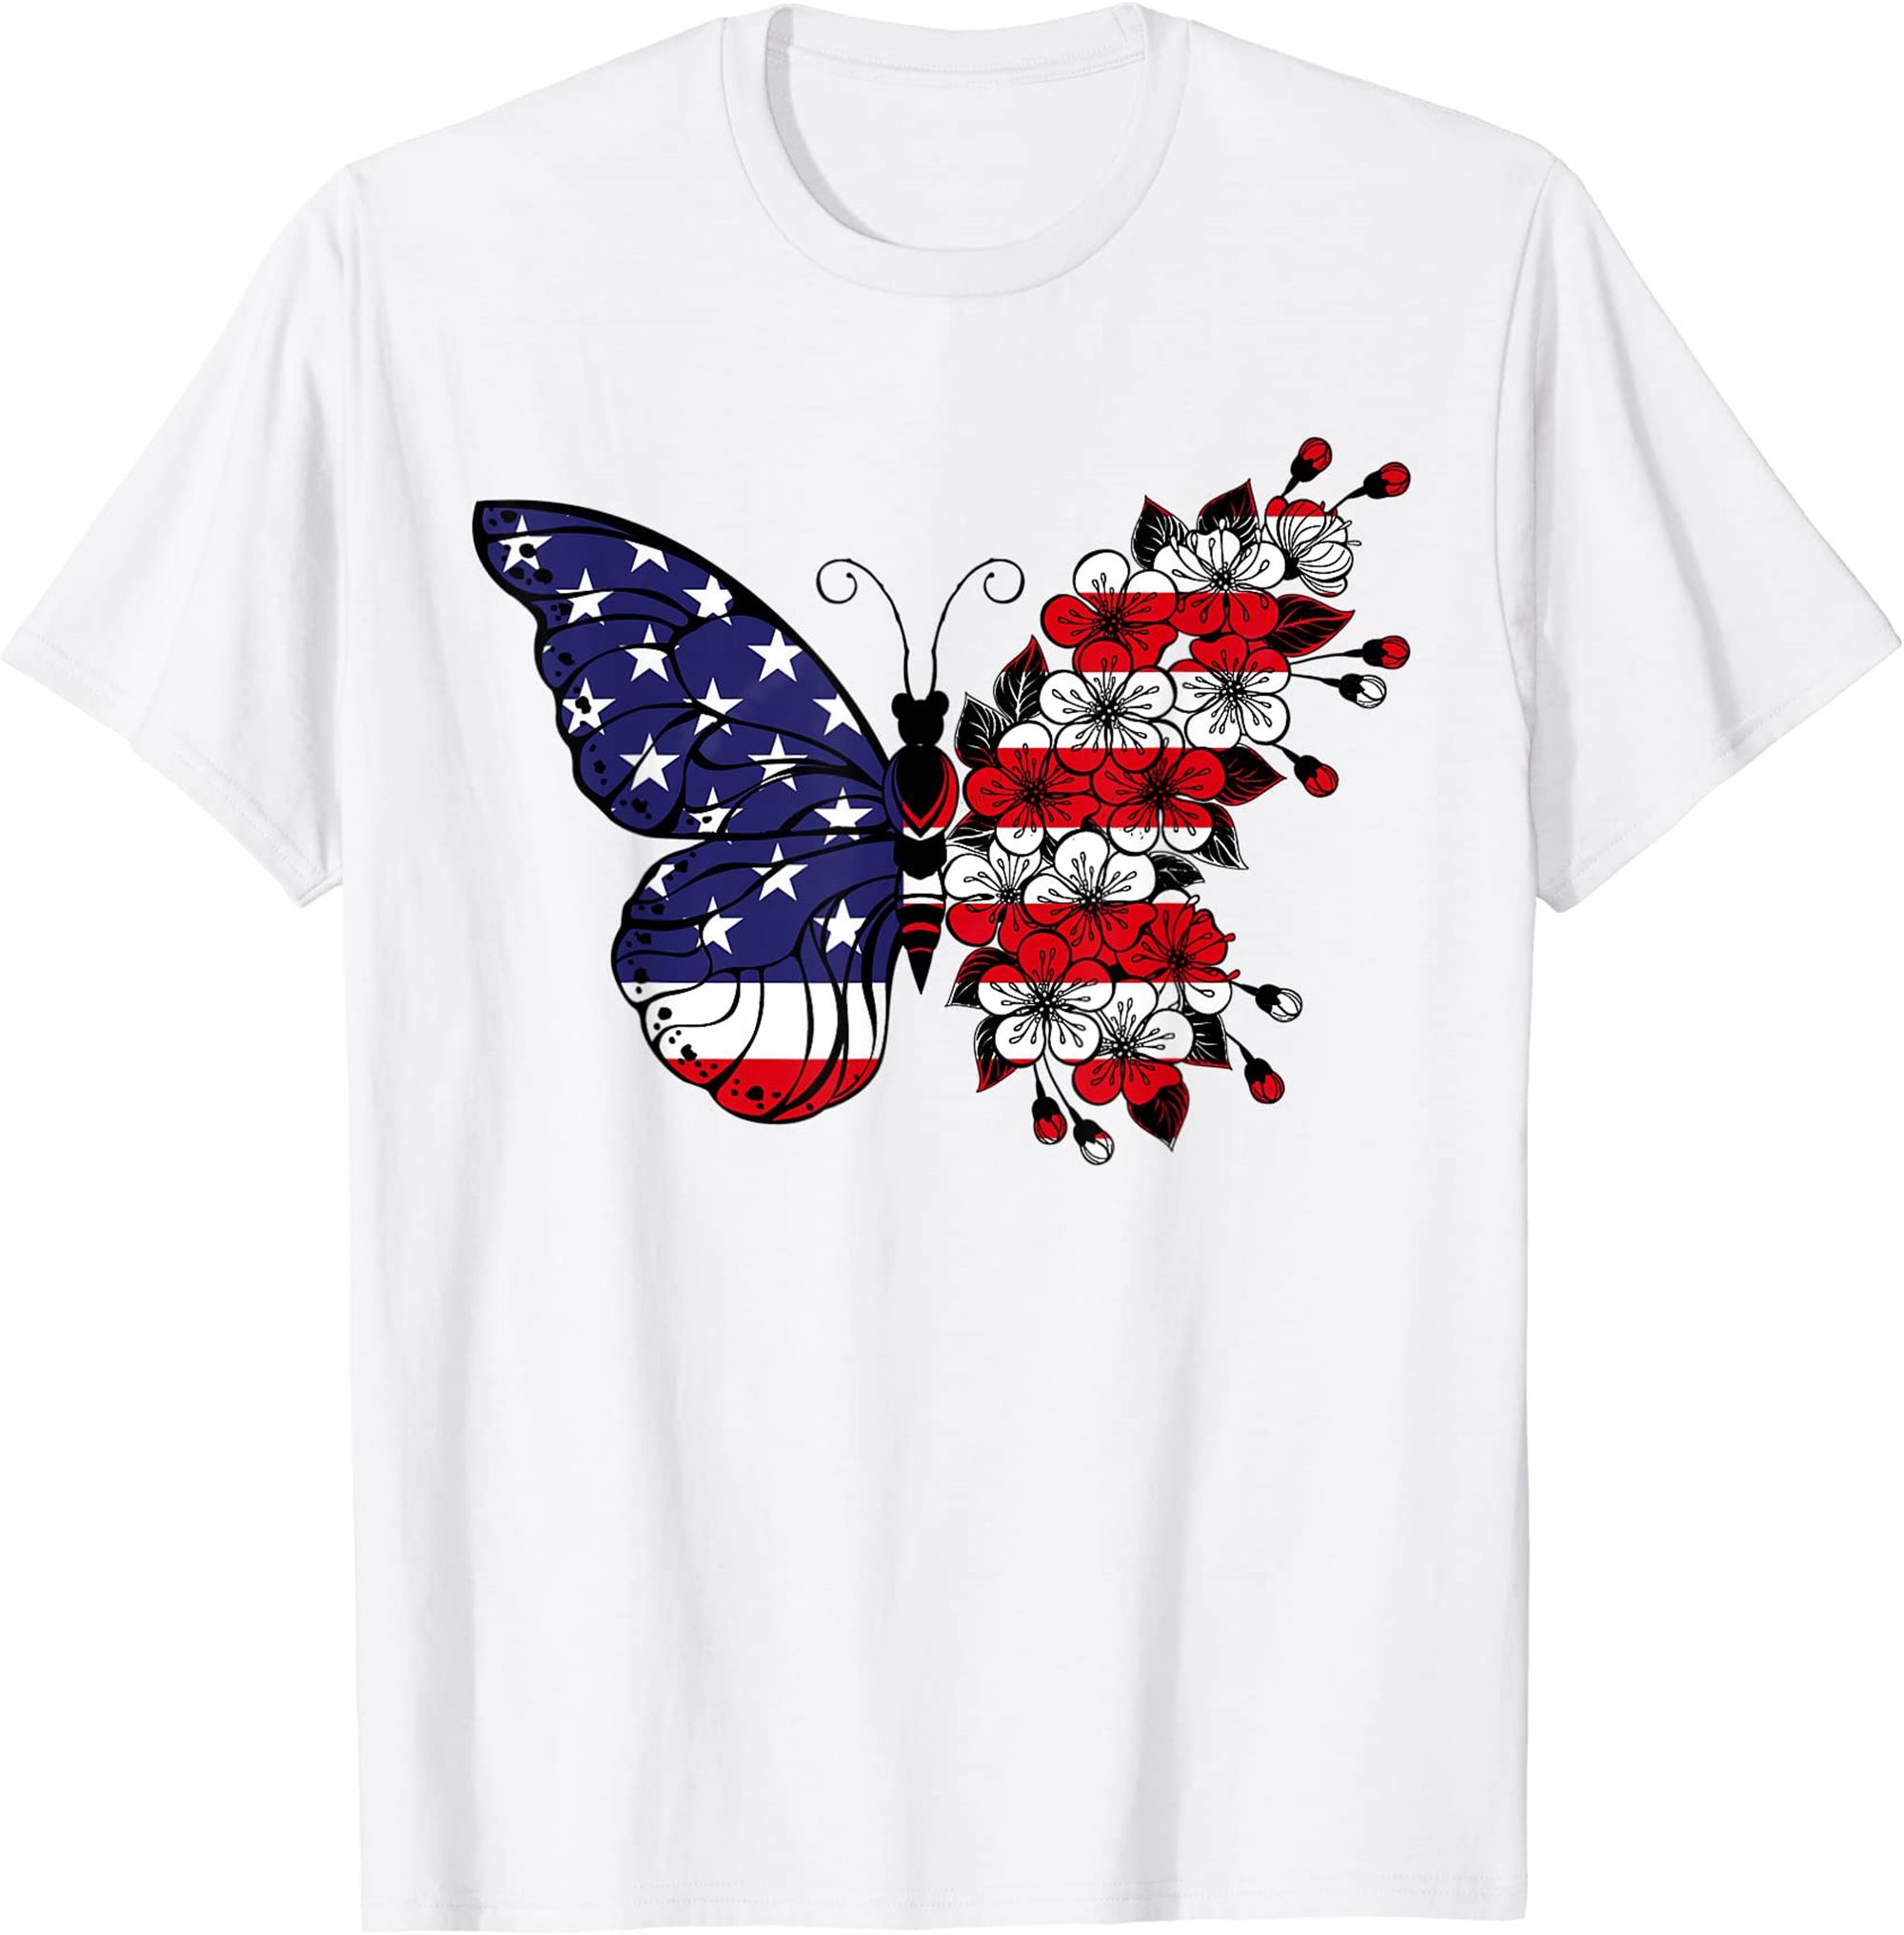 Butterfly 4th Of July Shirt Women American Flag Patriotic T-shirt Size Up To 5xl